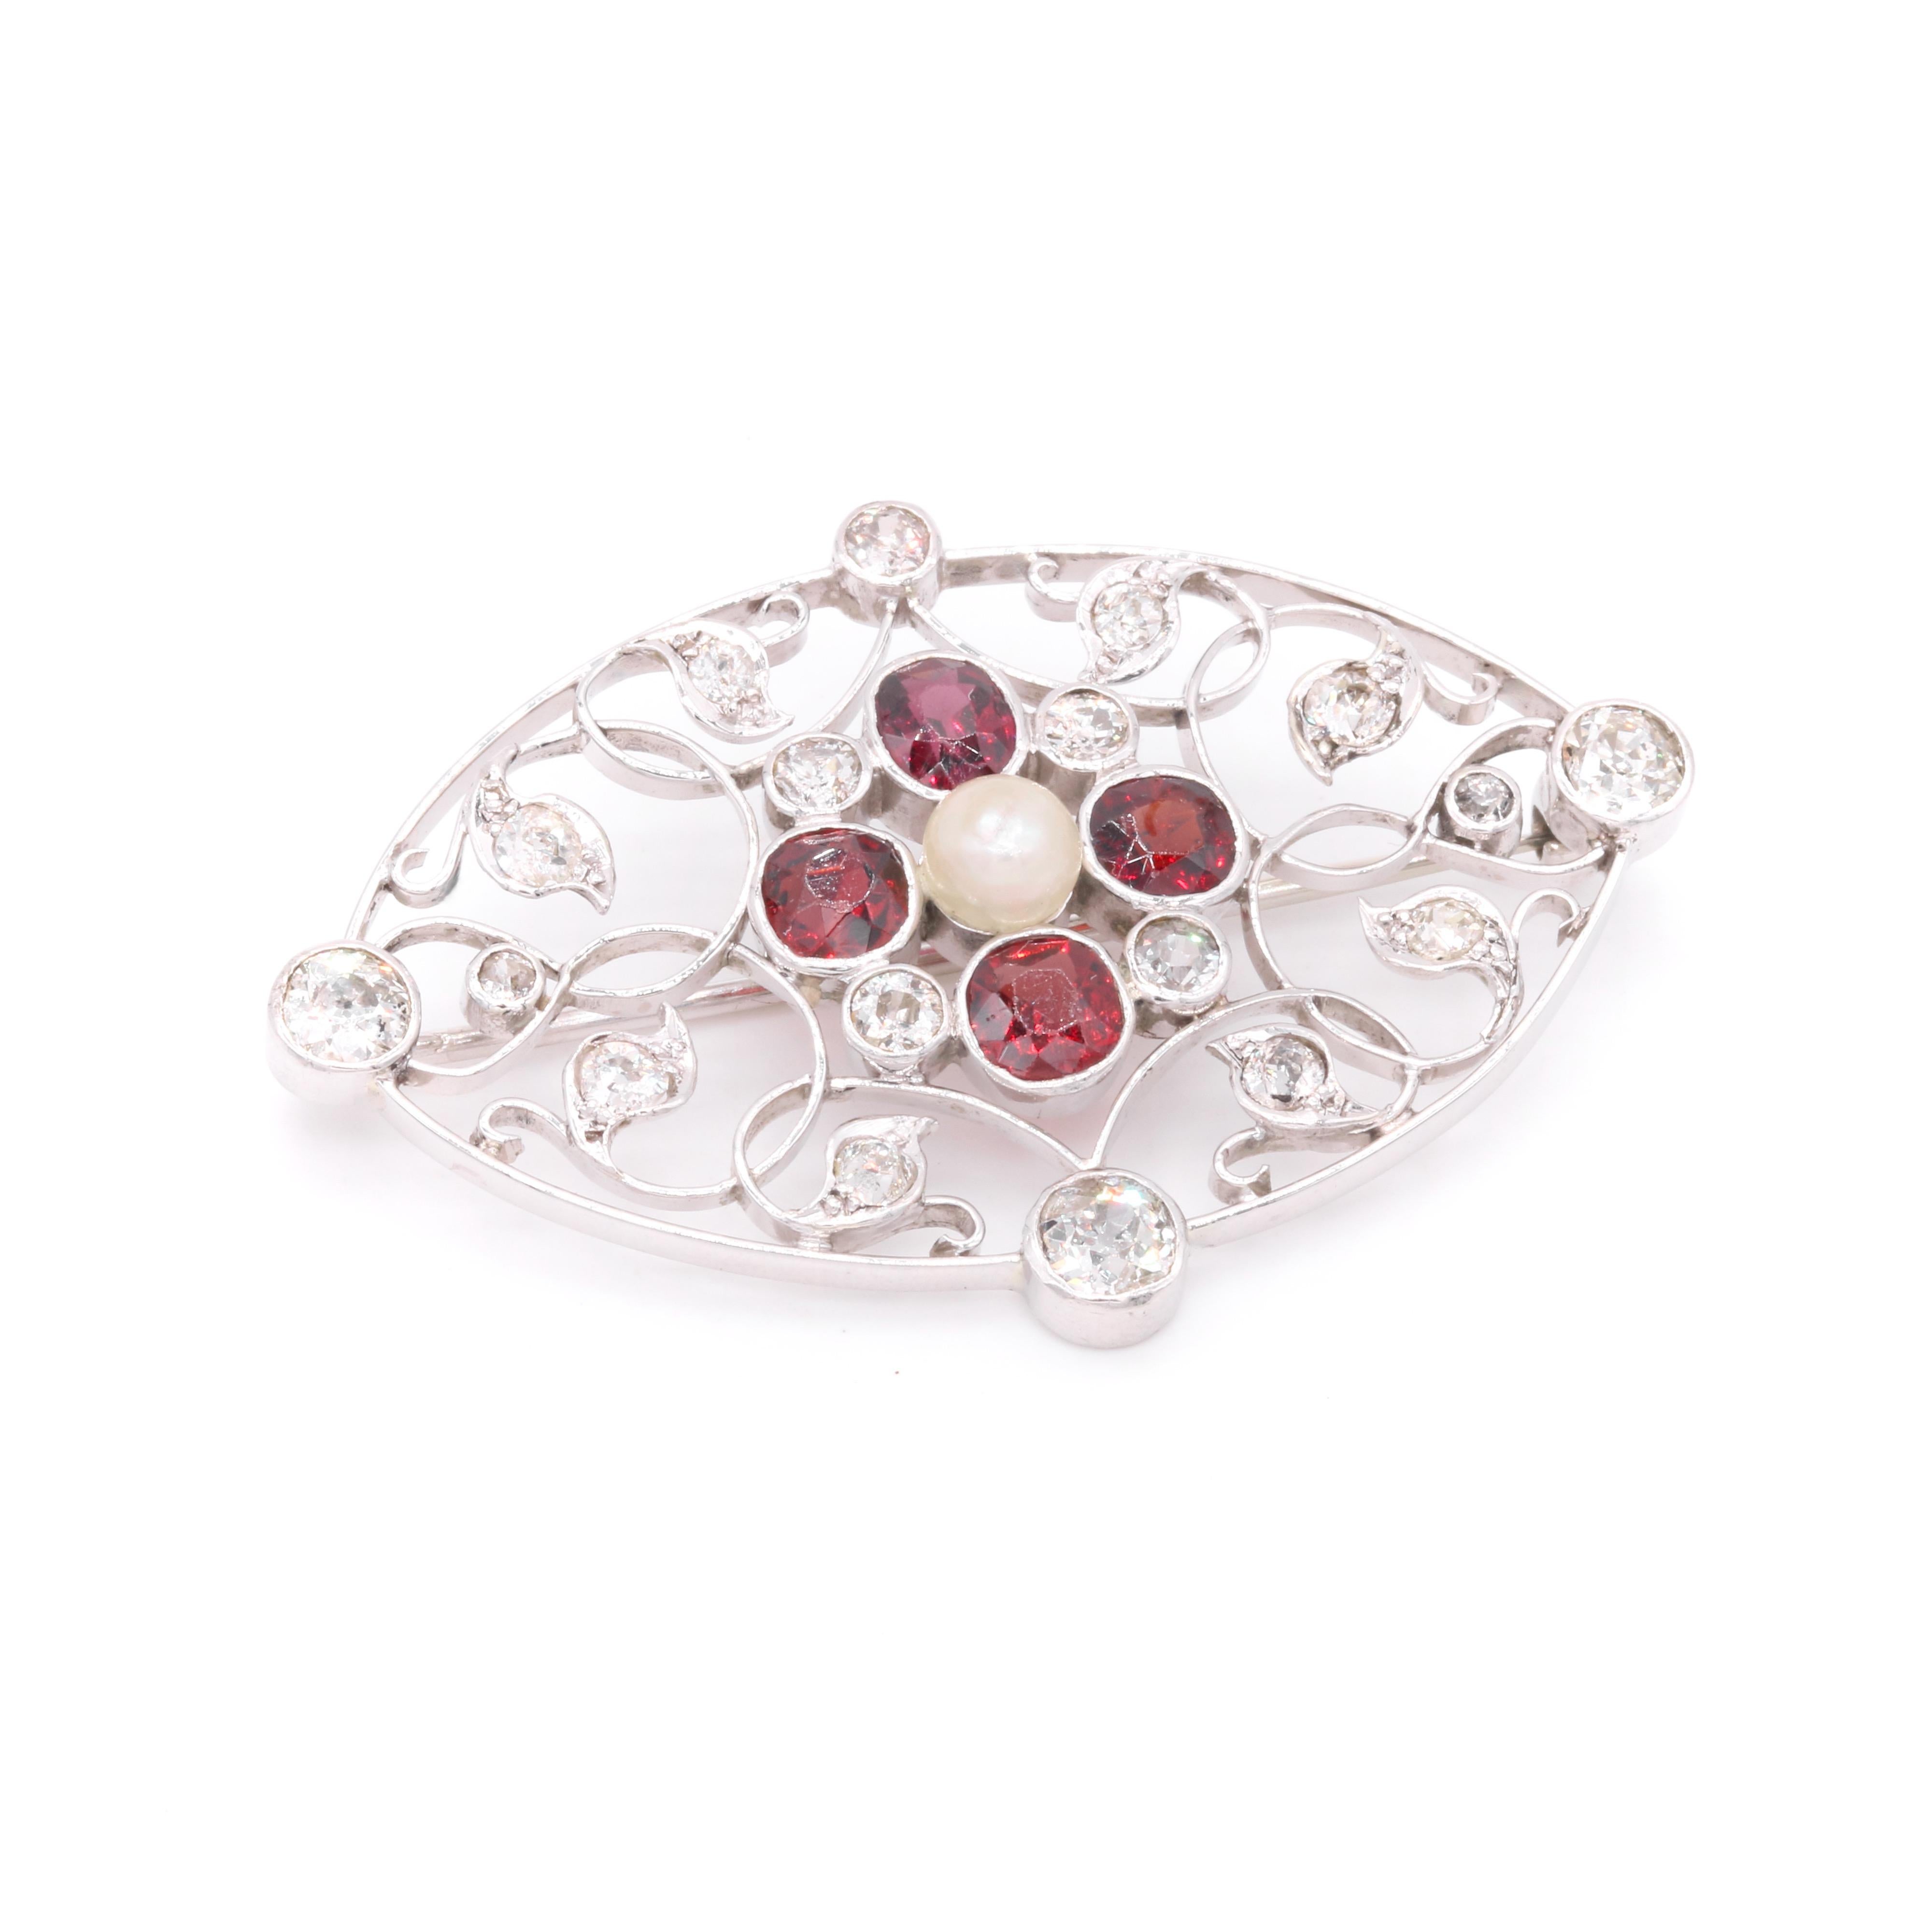 Antique Edwardian Platinum & 18K Gold 4.35tgw Garnet, Diamond & Pearl Brooch In Good Condition For Sale In Staines-Upon-Thames, GB